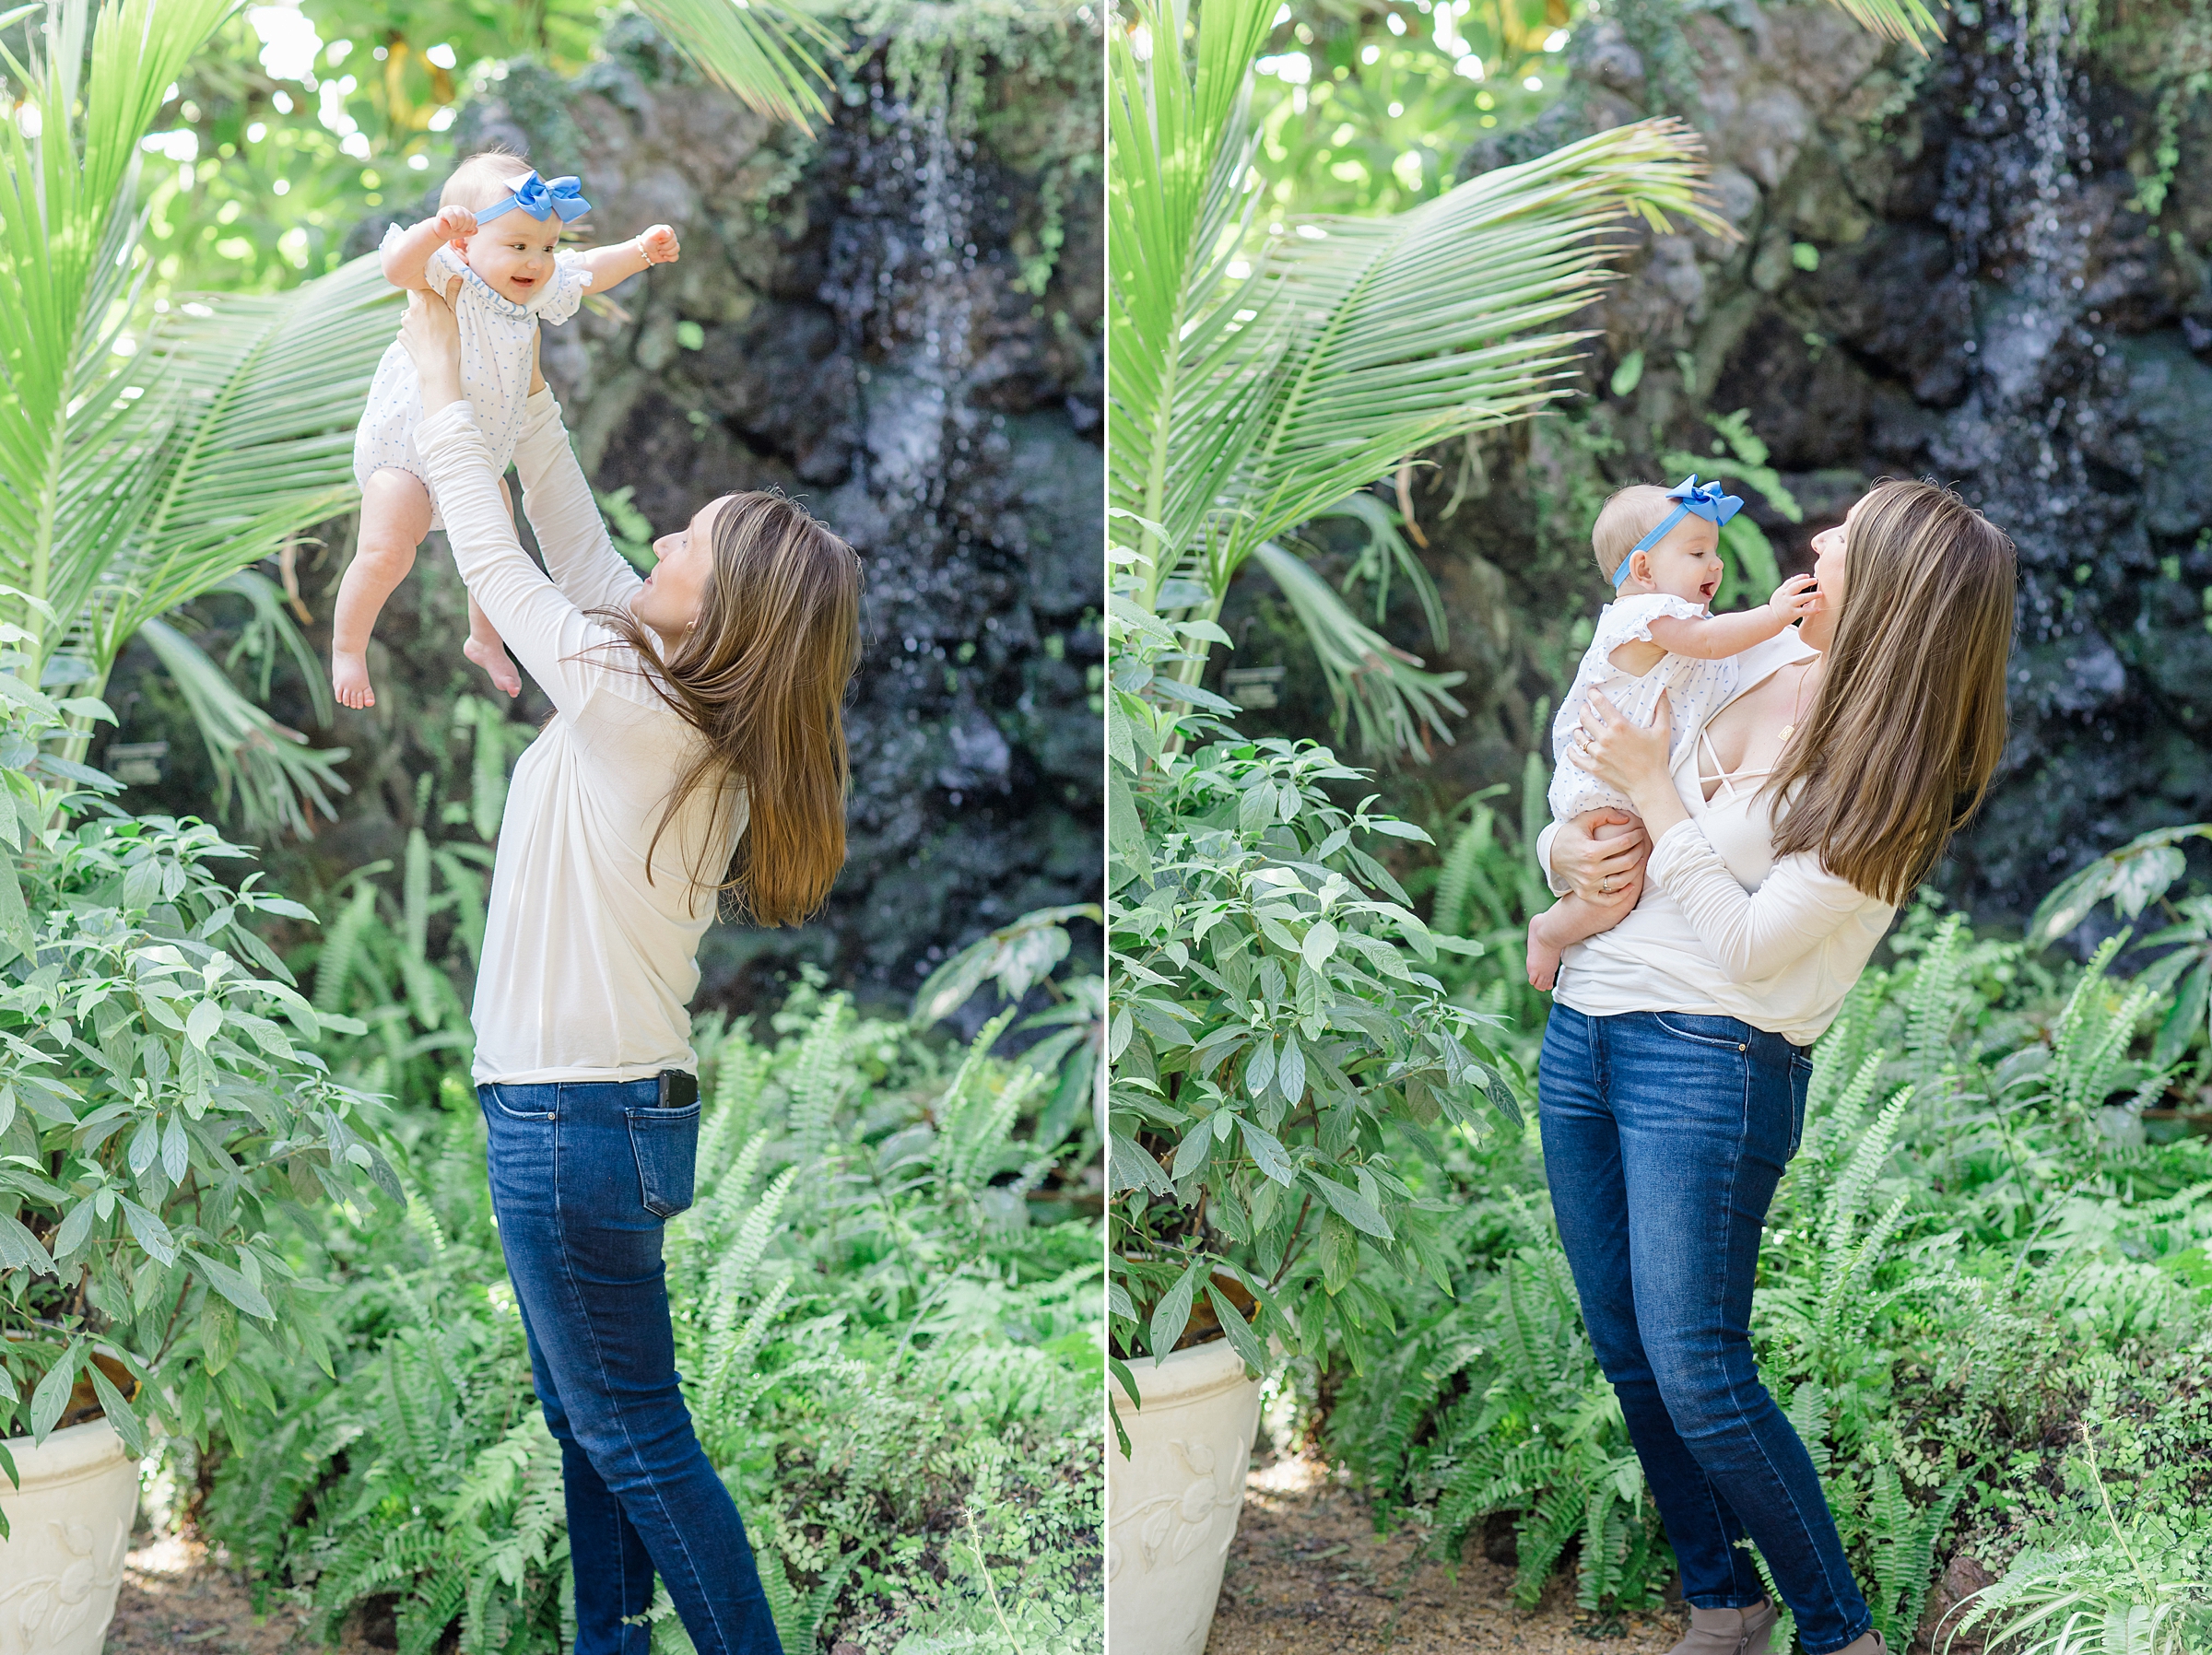 candid moments between mom and baby girl